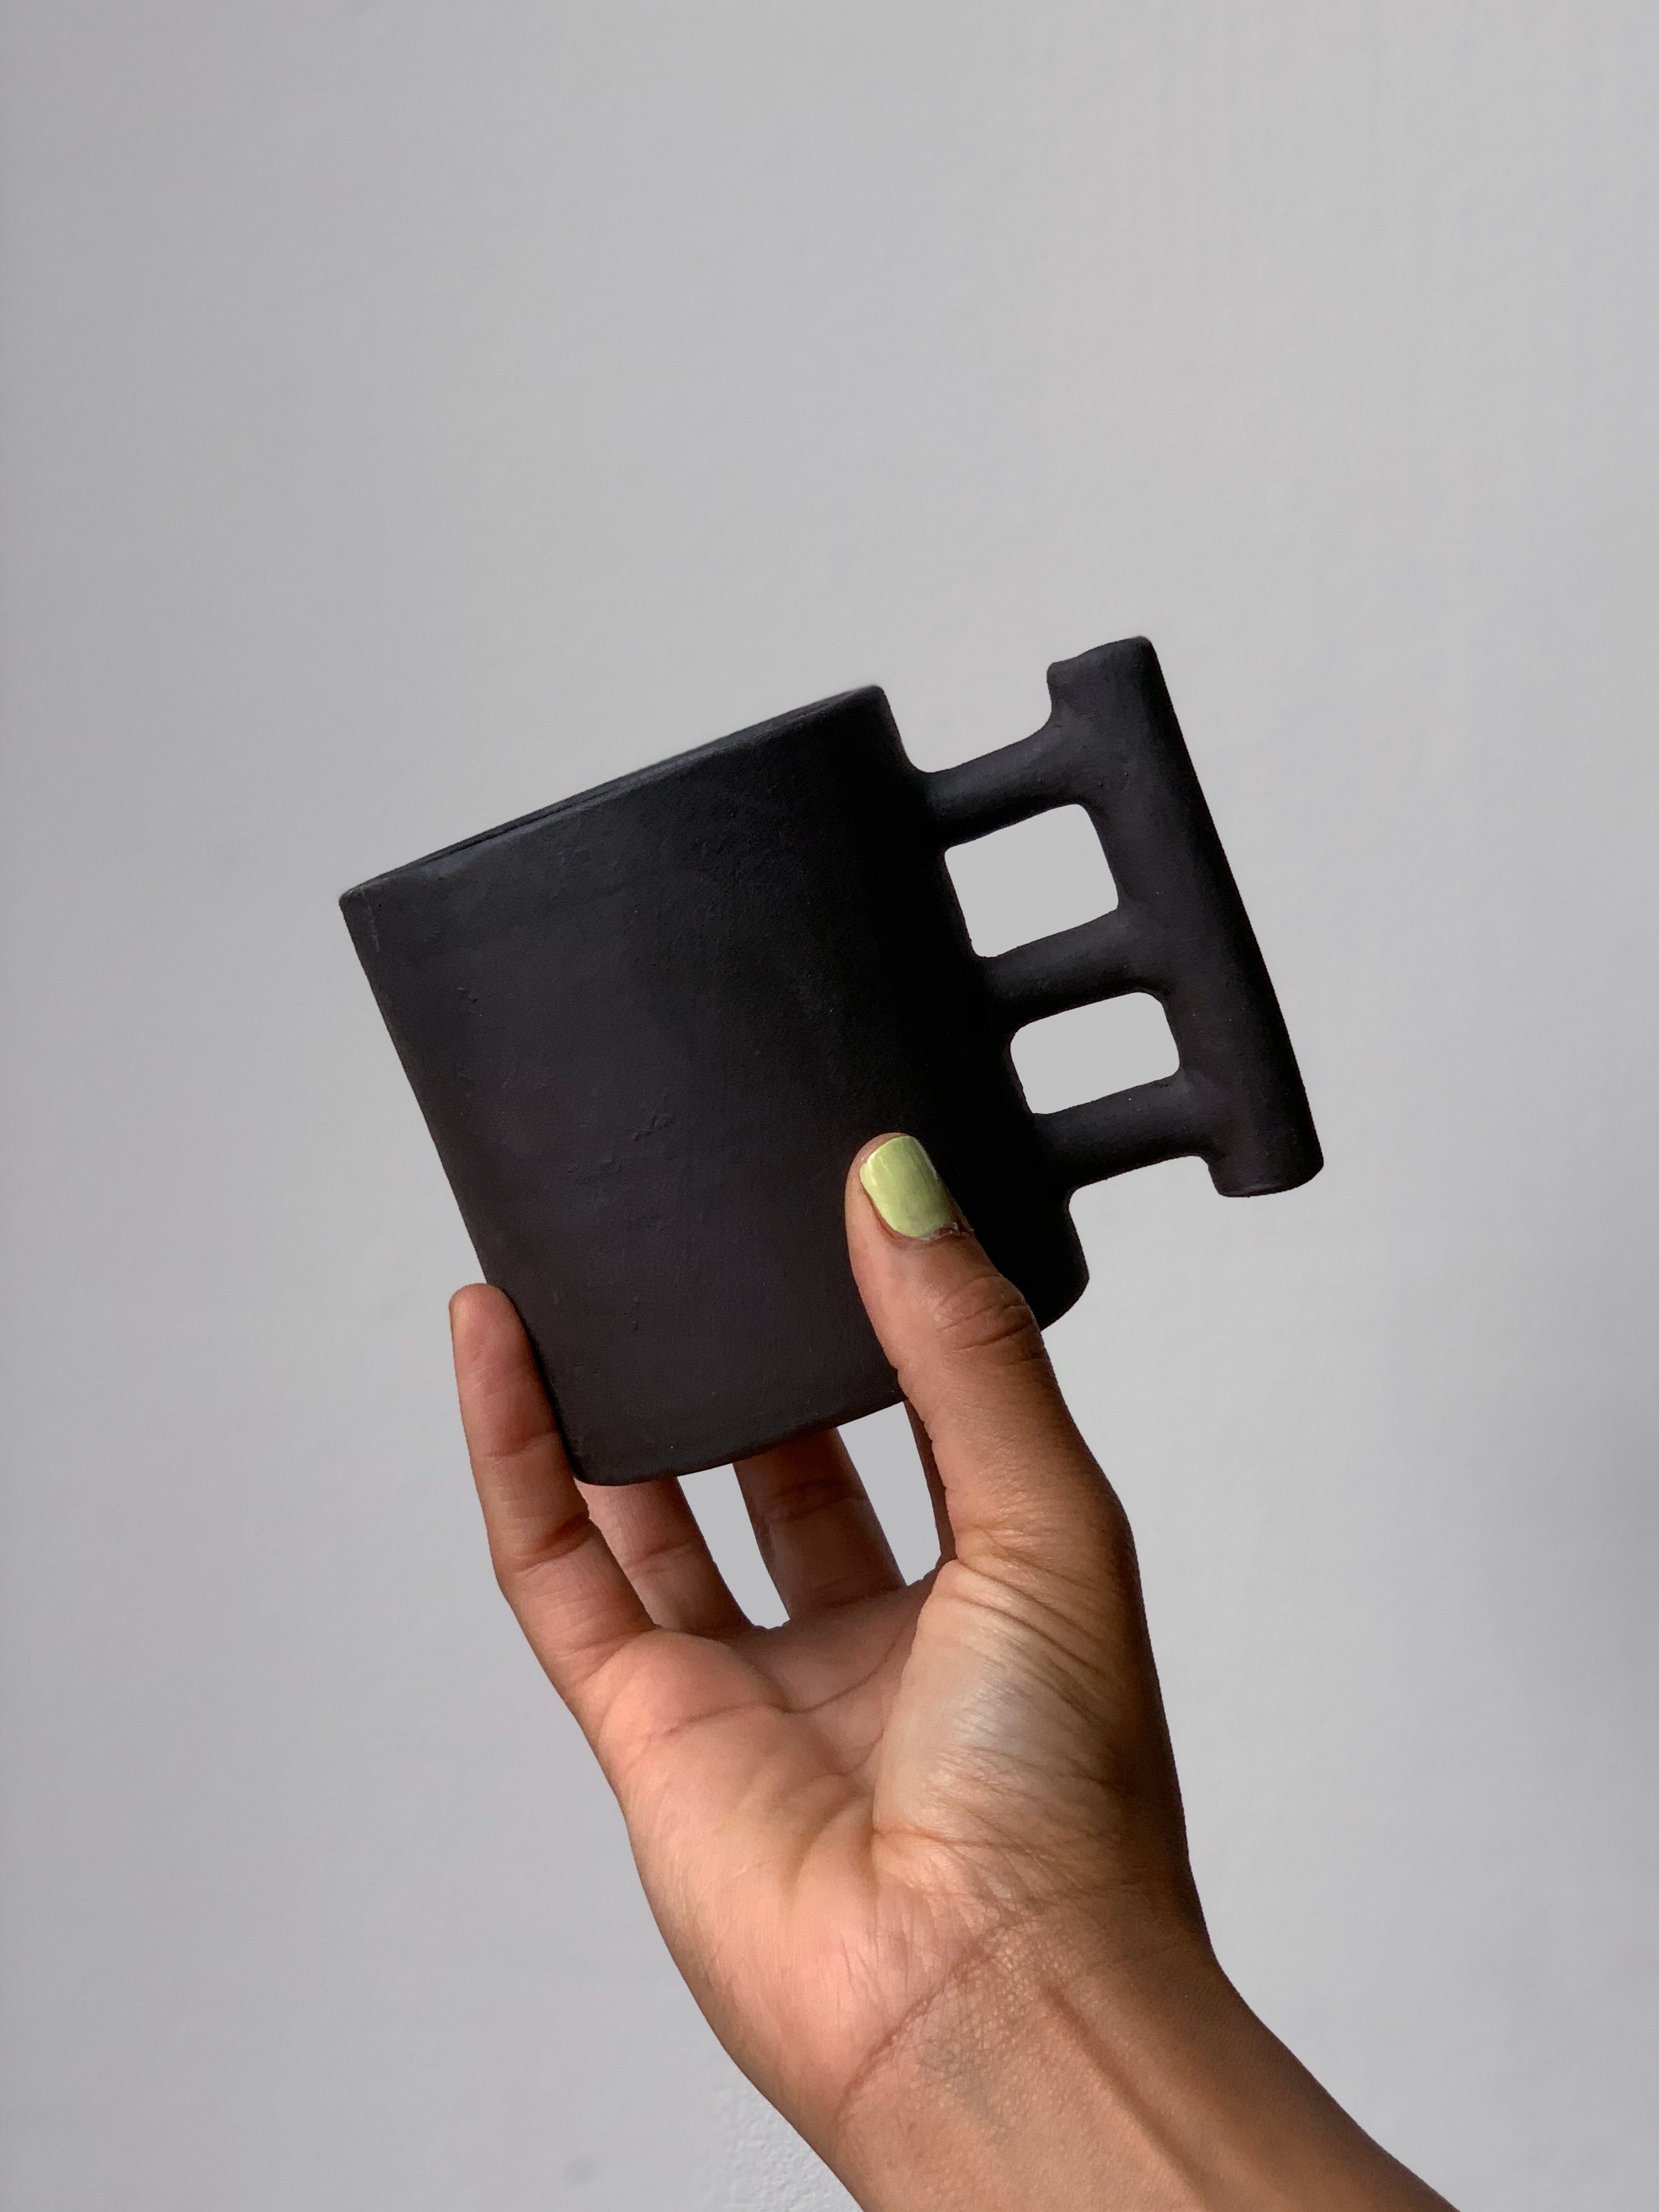 Black matte stoneware ceramic mug with three bars connecting to a thicker bar as the handle.